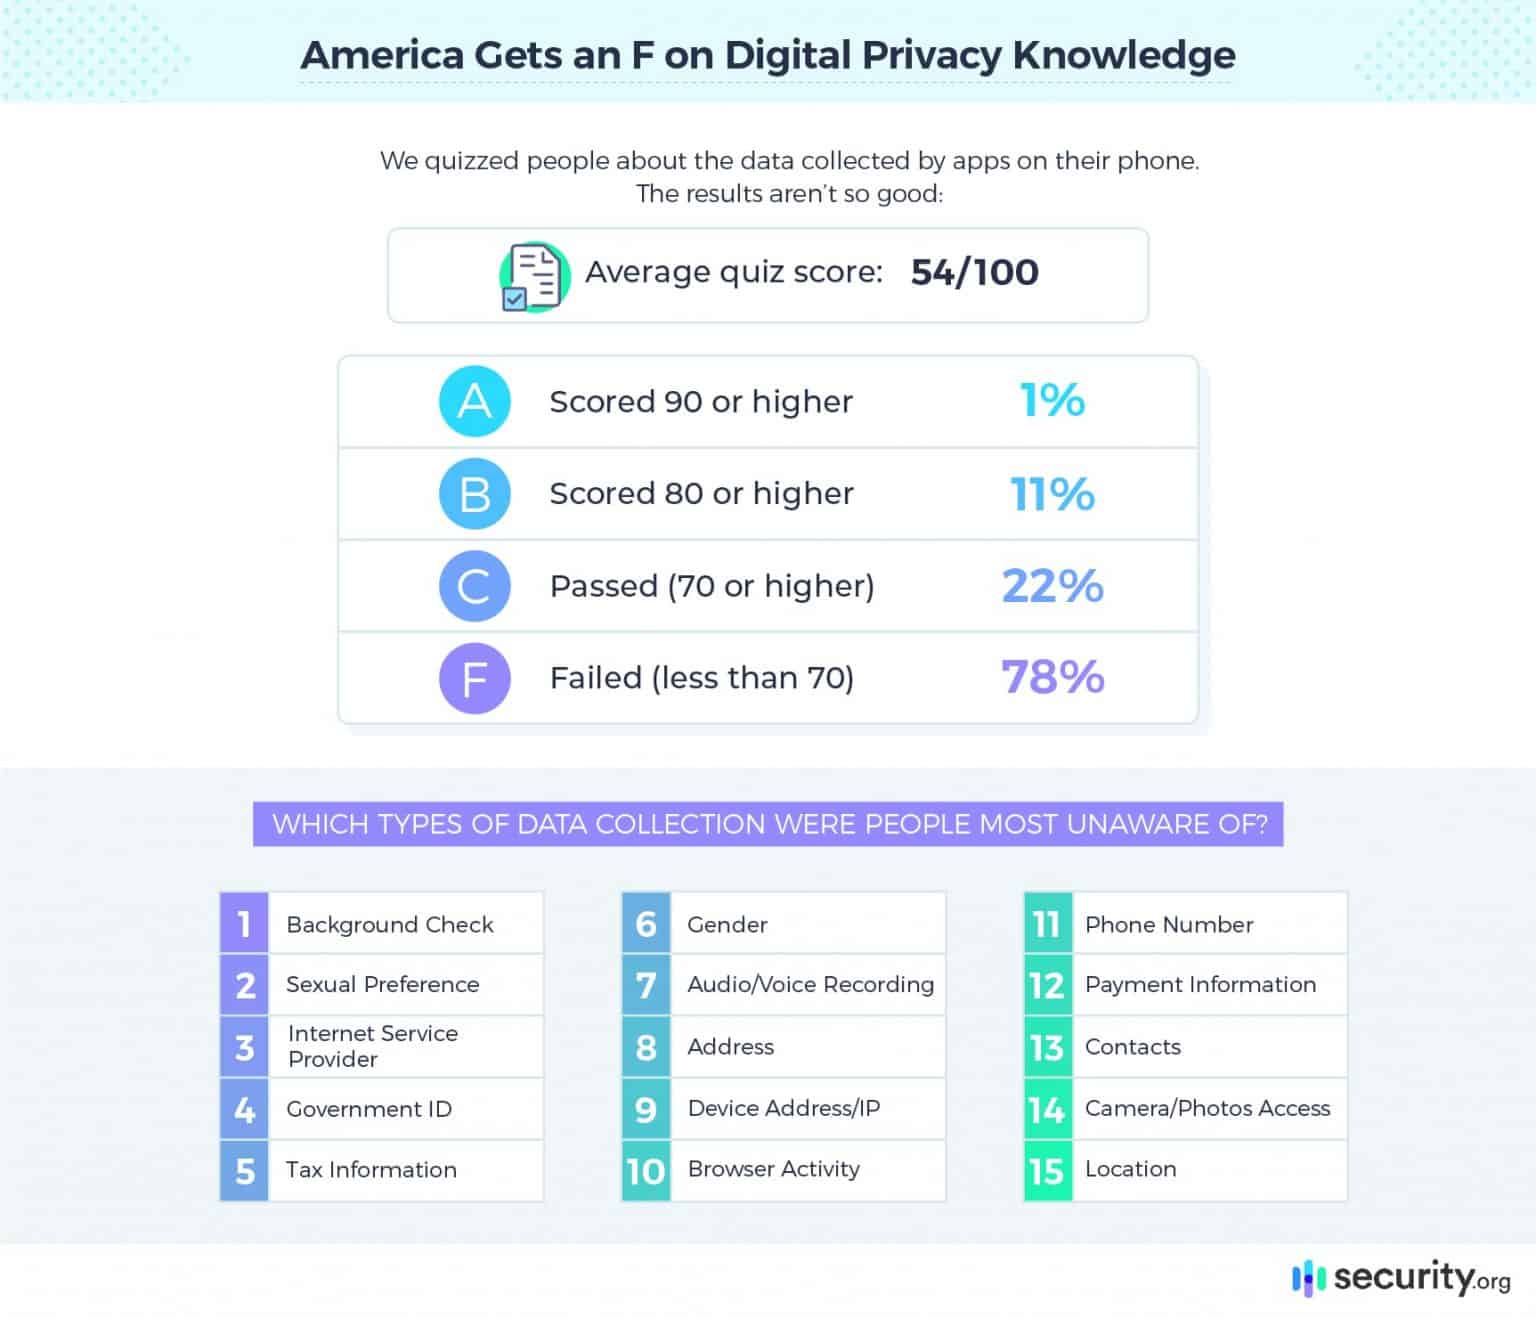 Americans Get an F on Digital Privacy Knowledge | Security.org